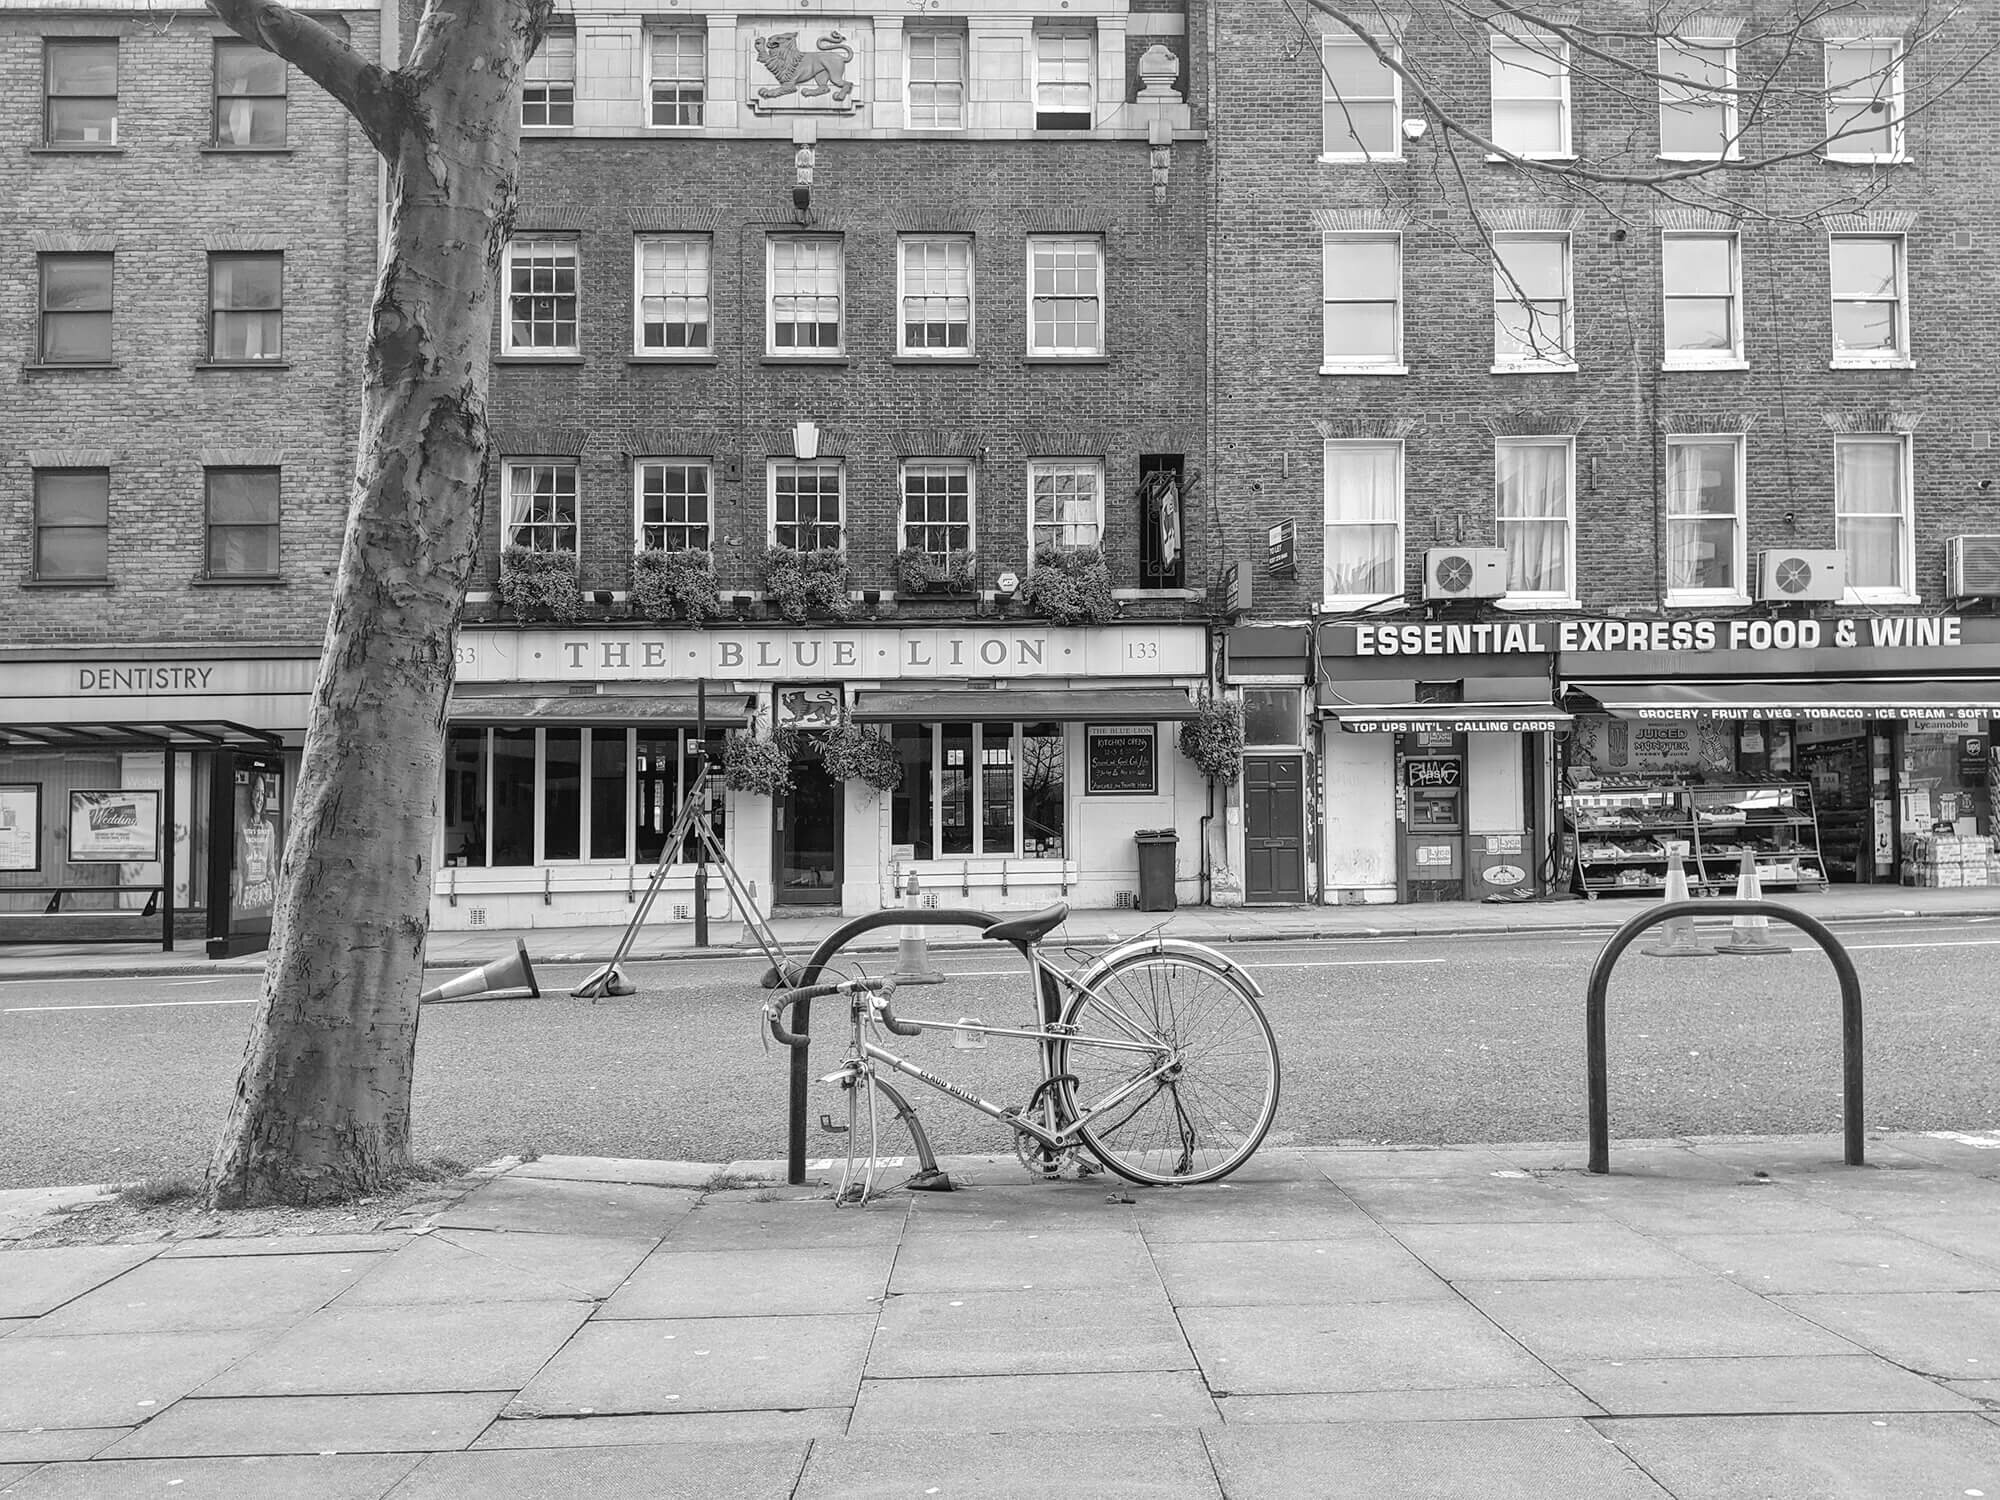 Womens town bike missing front wheel. Black and white cycling photograph.